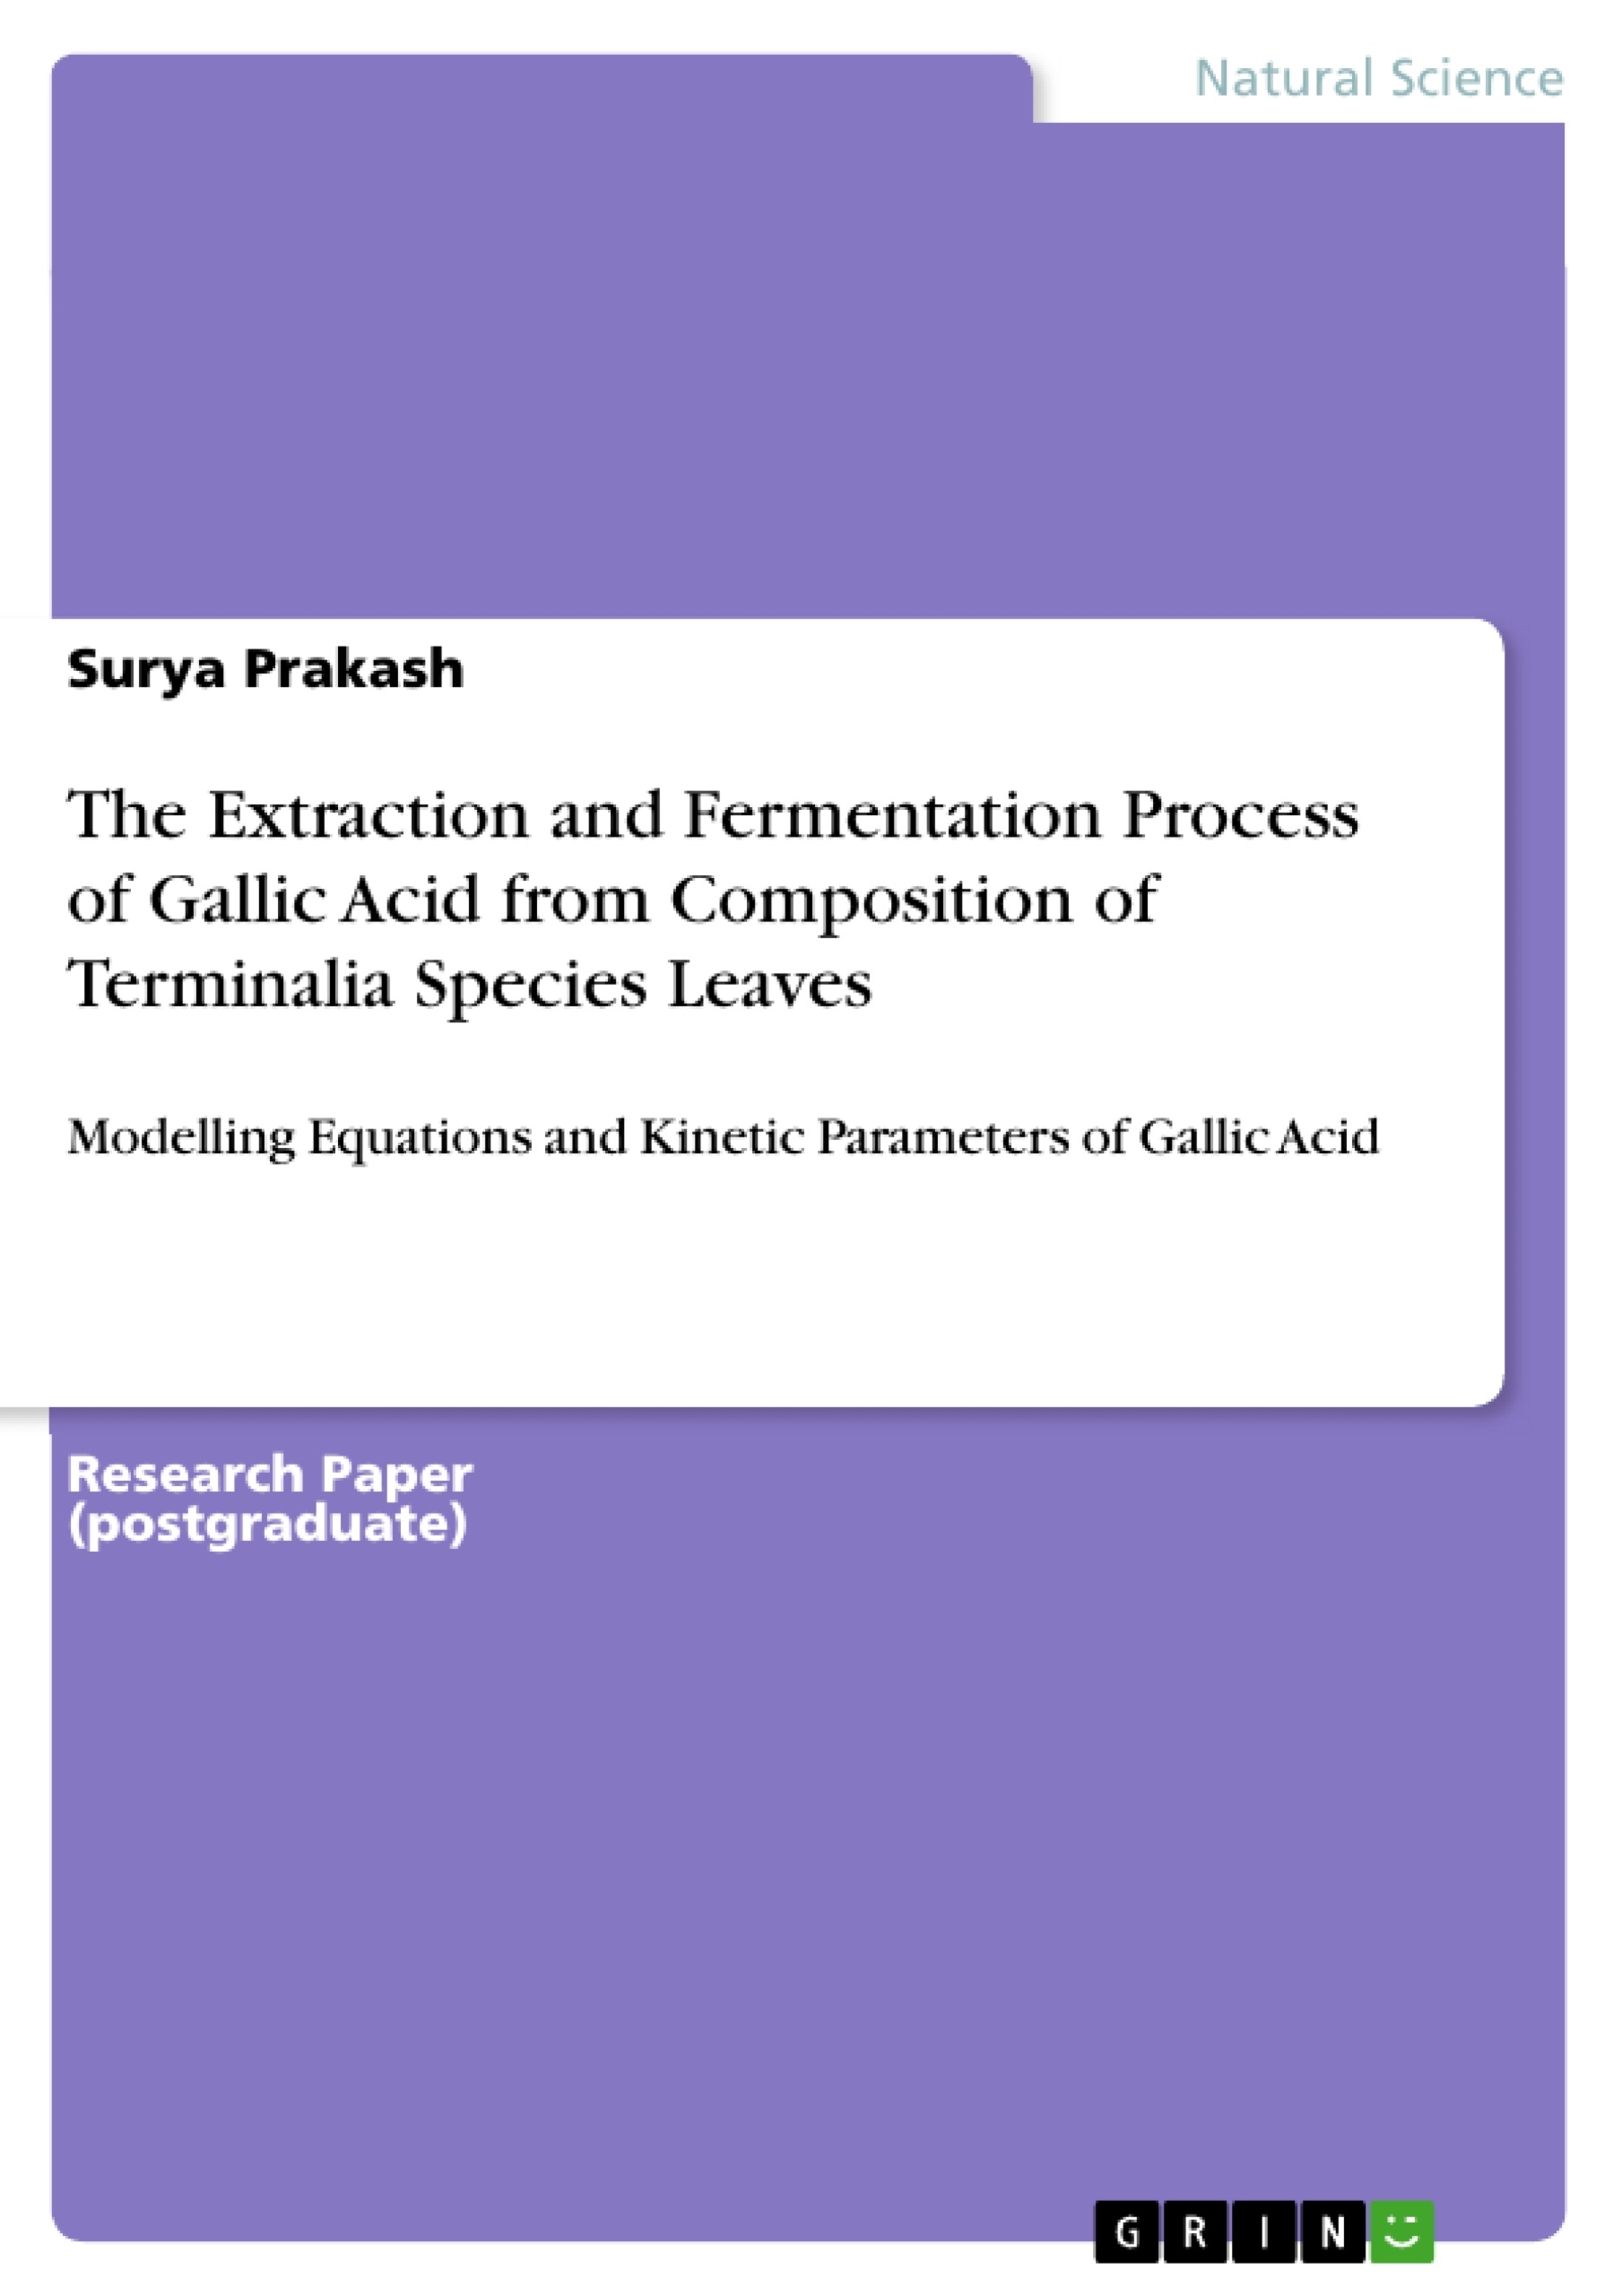 Title: The Extraction and Fermentation Process of Gallic Acid from Composition of Terminalia Species Leaves